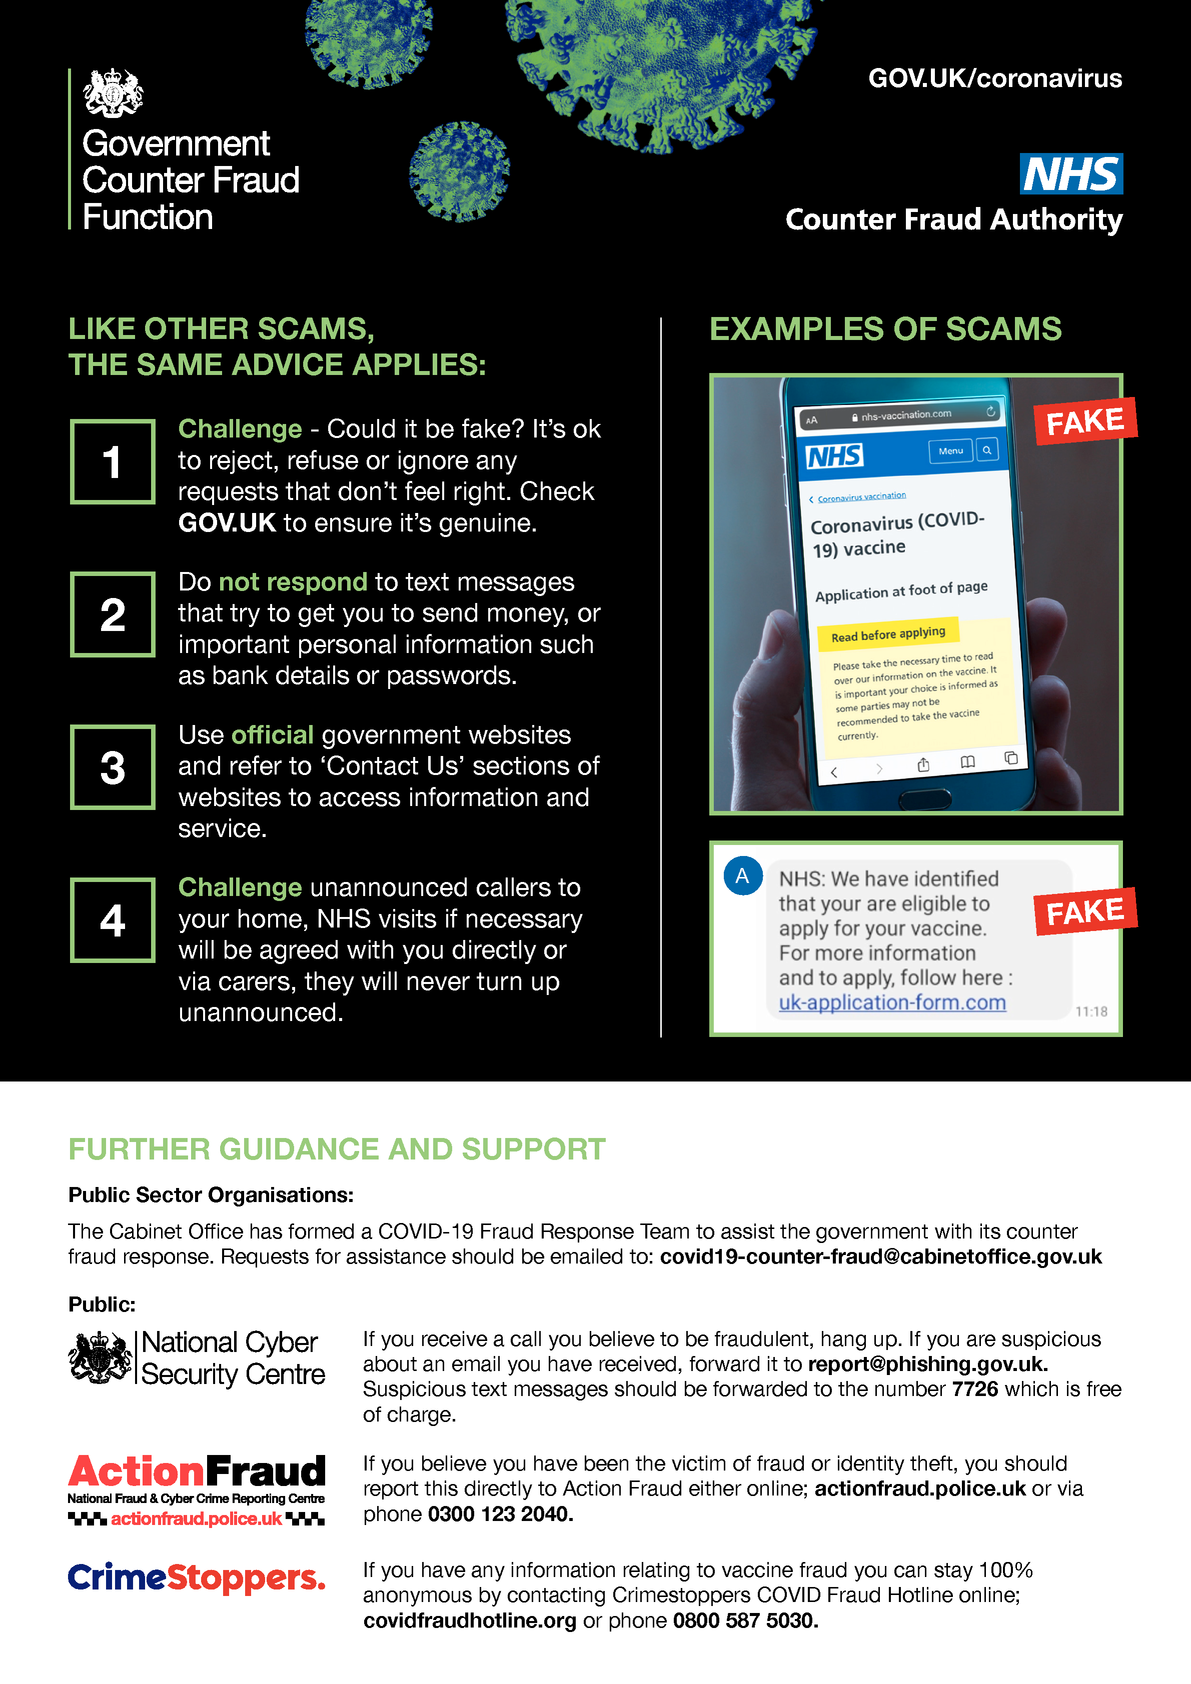 LIKE OTHER SCAMS, THE SAME ADVICE APPLIES:
1 Challenge - Could it be fake? It’s ok to reject, refuse or ignore any requests that don’t feel right. Check GOV.UK to ensure it’s genuine.
2 Do not respond to text messages that try to get you to send money, or important personal information such as bank details or passwords.
3 Use official government websites and refer to ‘Contact Us’ sections of websites to access information and service. 
4 Challenge unannounced callers to your home, NHS visits if necessary will be agreed with you directly or via carers, they will never turn up unannounced.